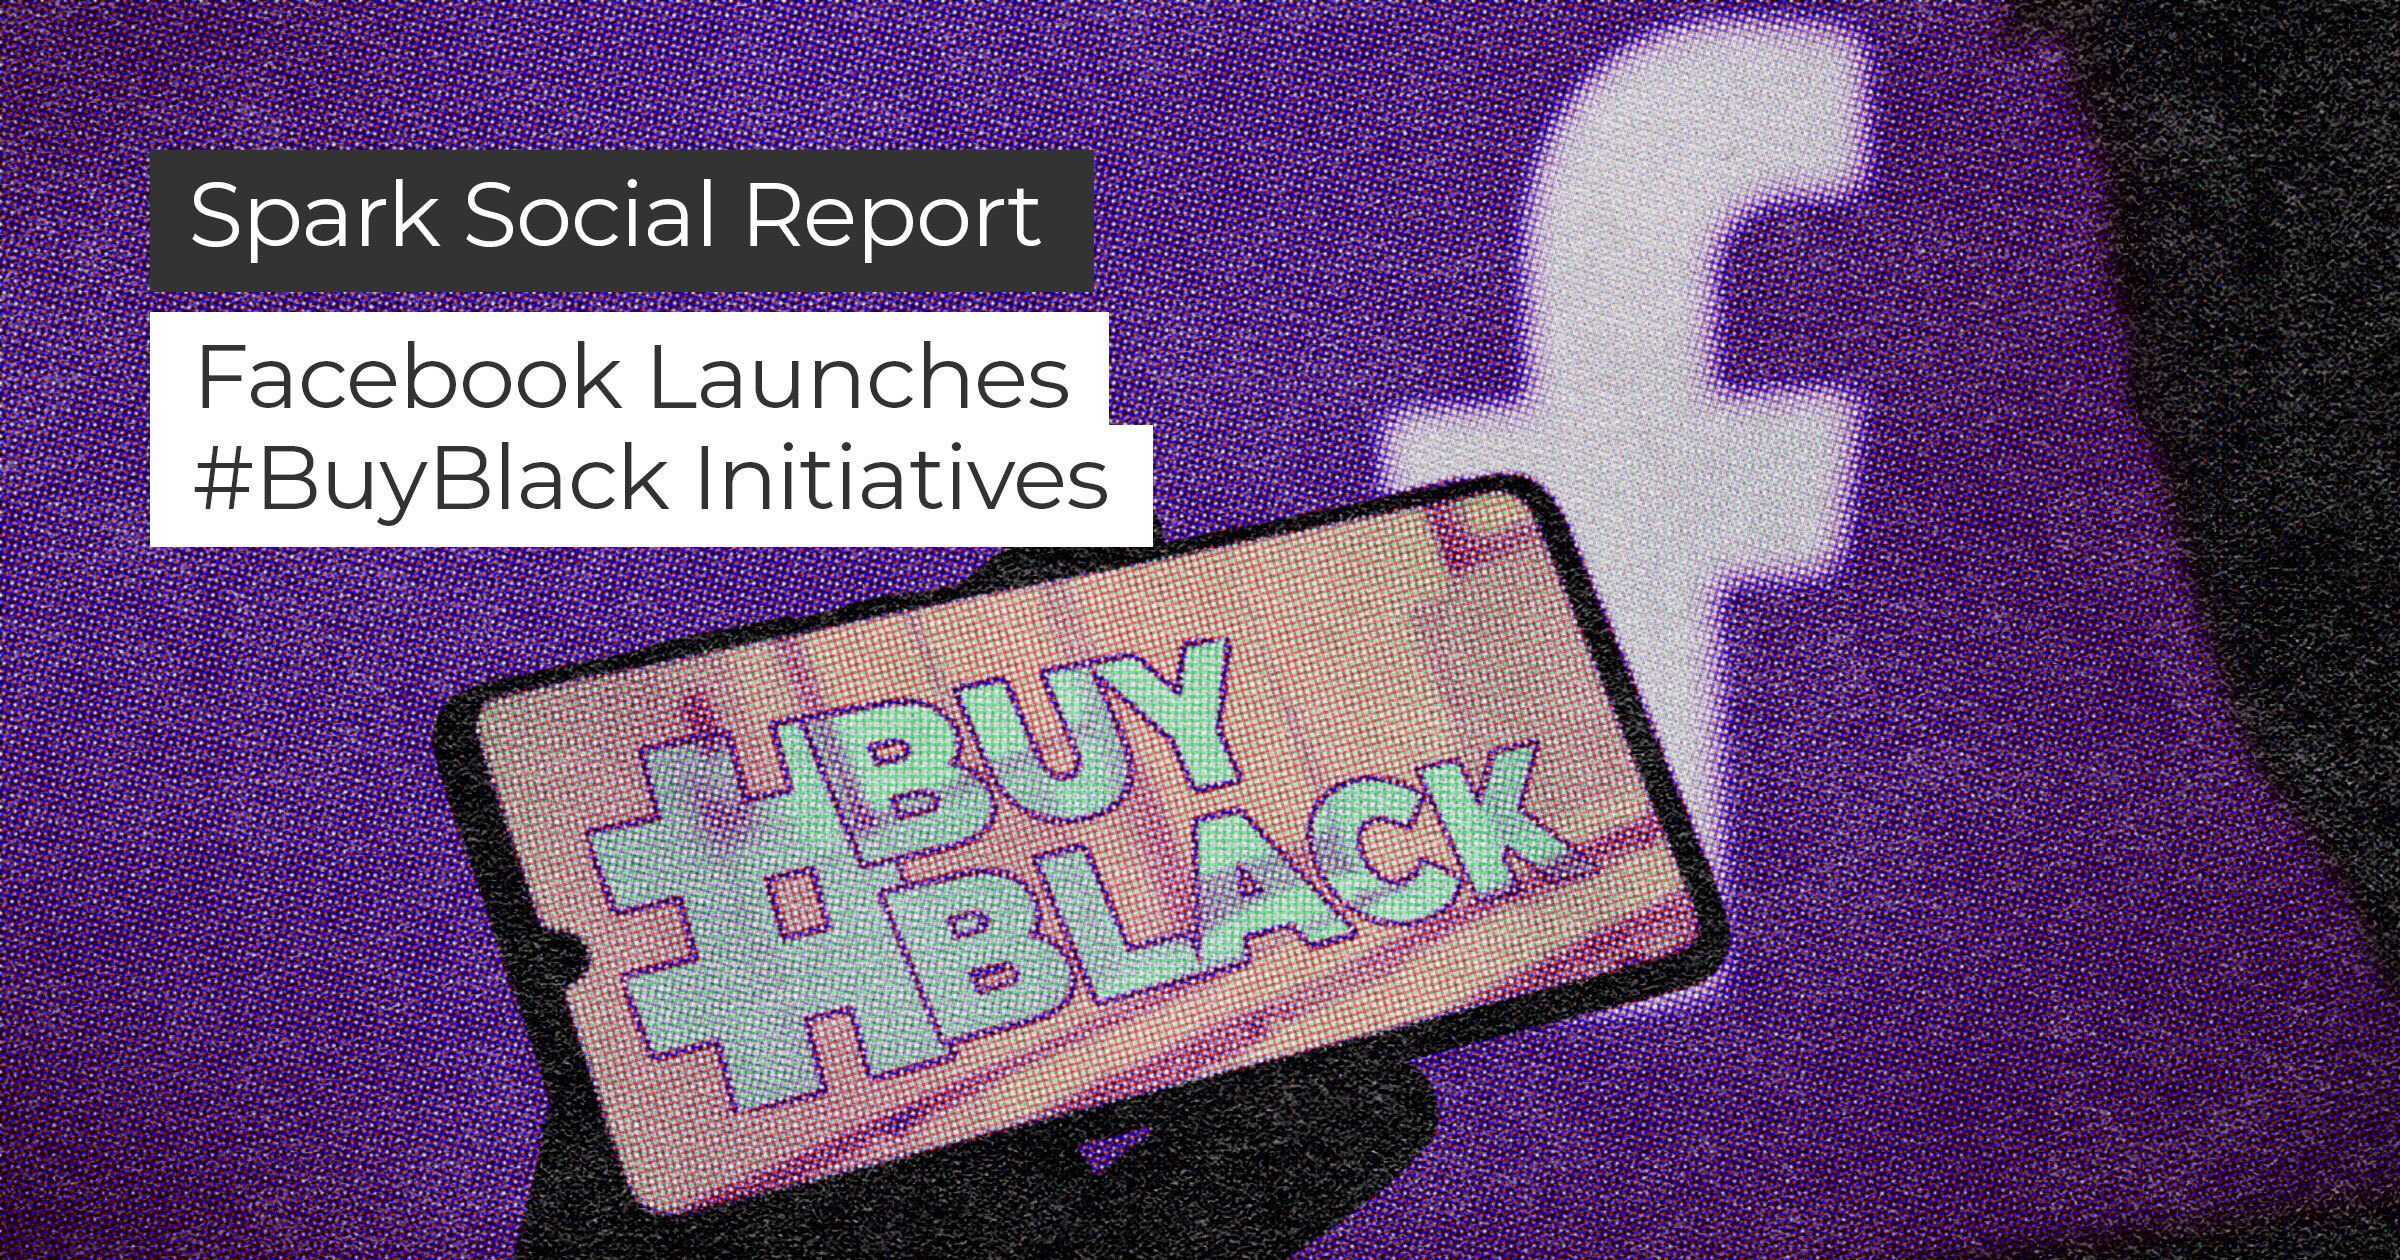 Facebook launches #BuyBlack initiatives